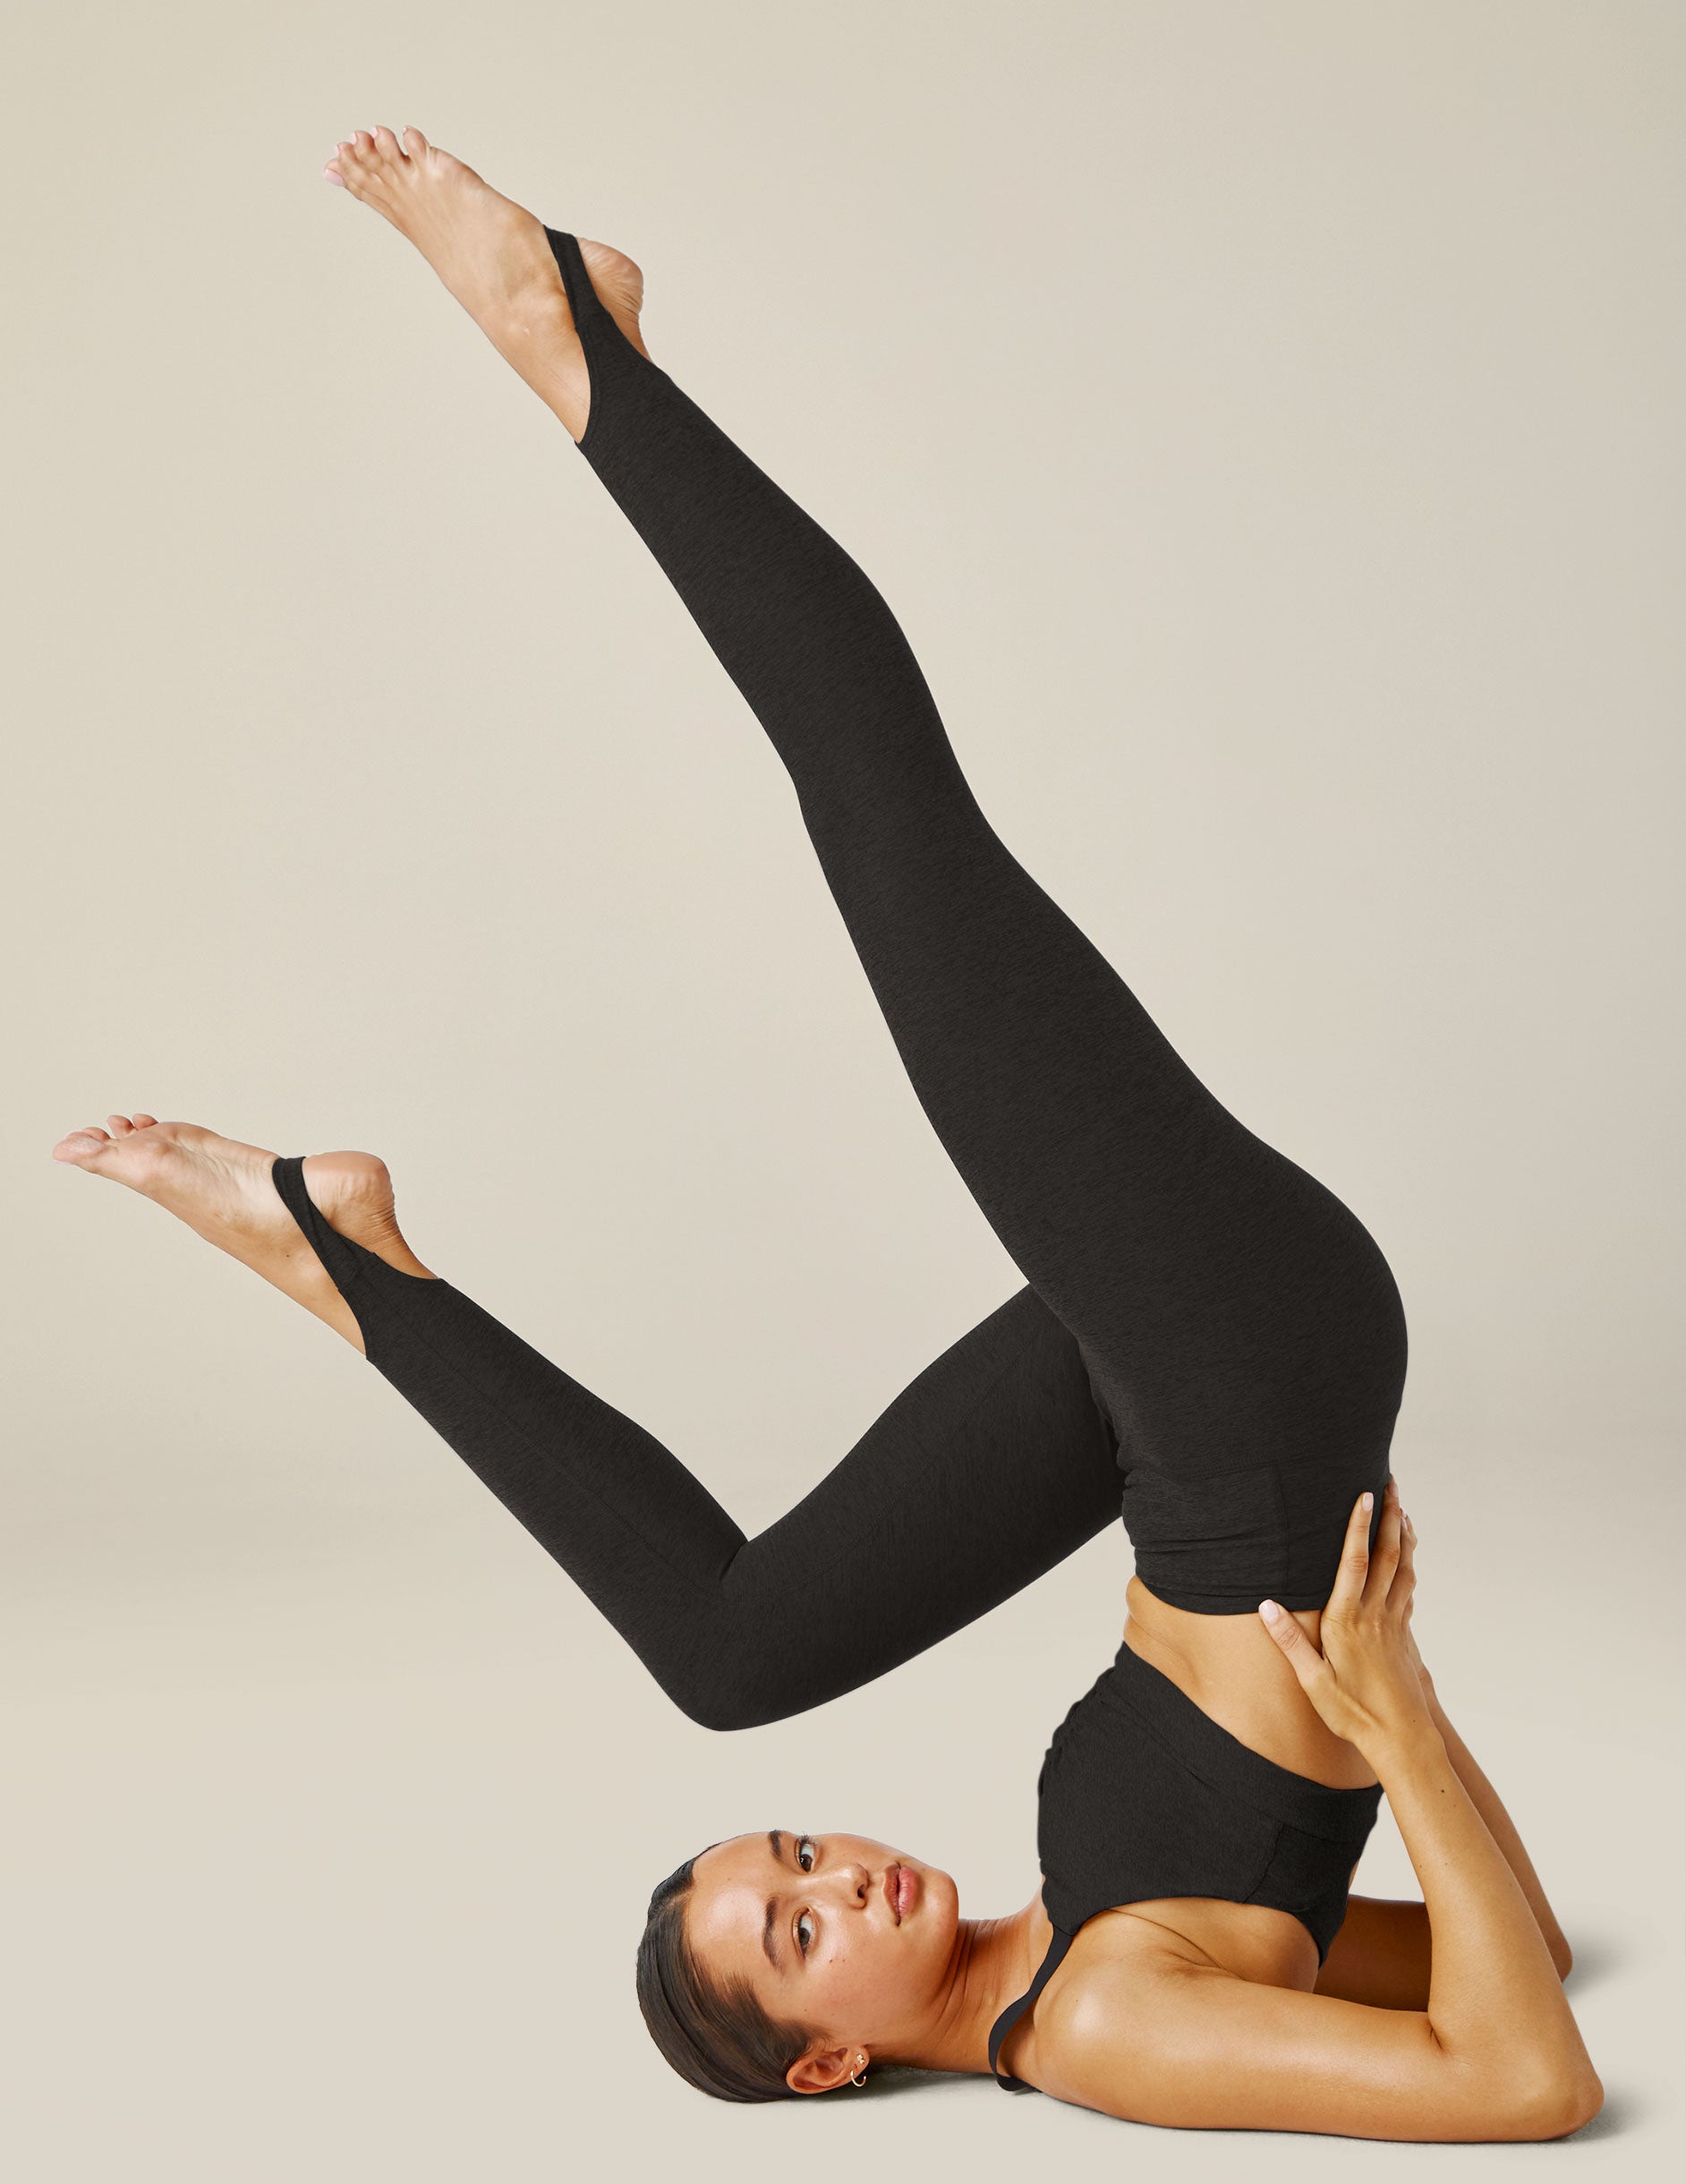 Beyond Yoga - The Beyond Yoga Quilted Stirrup #Legging will make